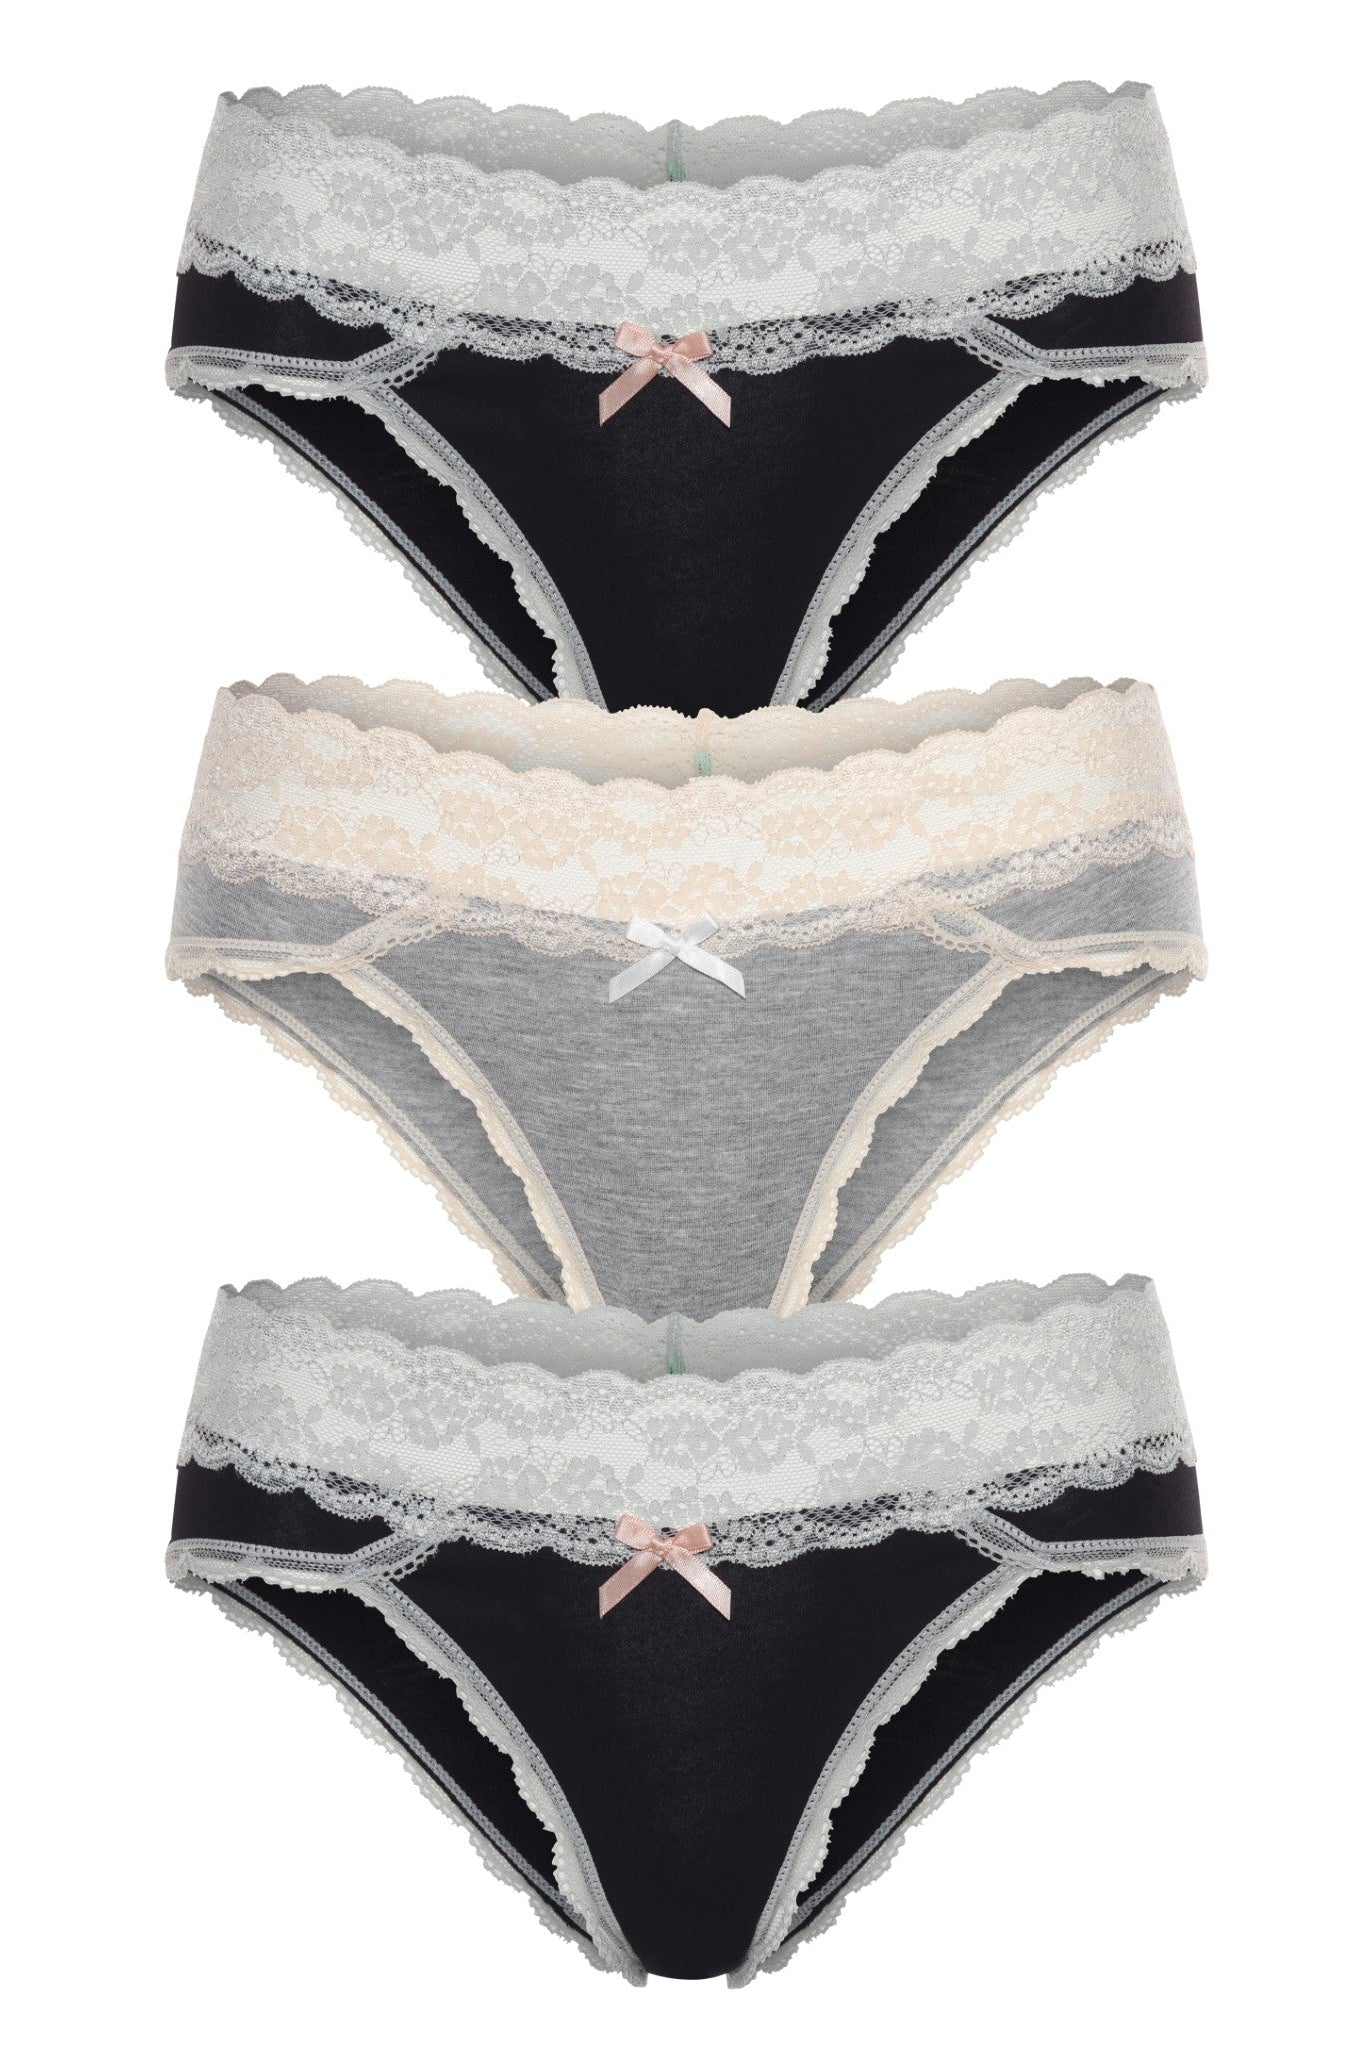 Ahna Hipster 3-Pack - Panty - Black Silver Heather Grey Black Silver